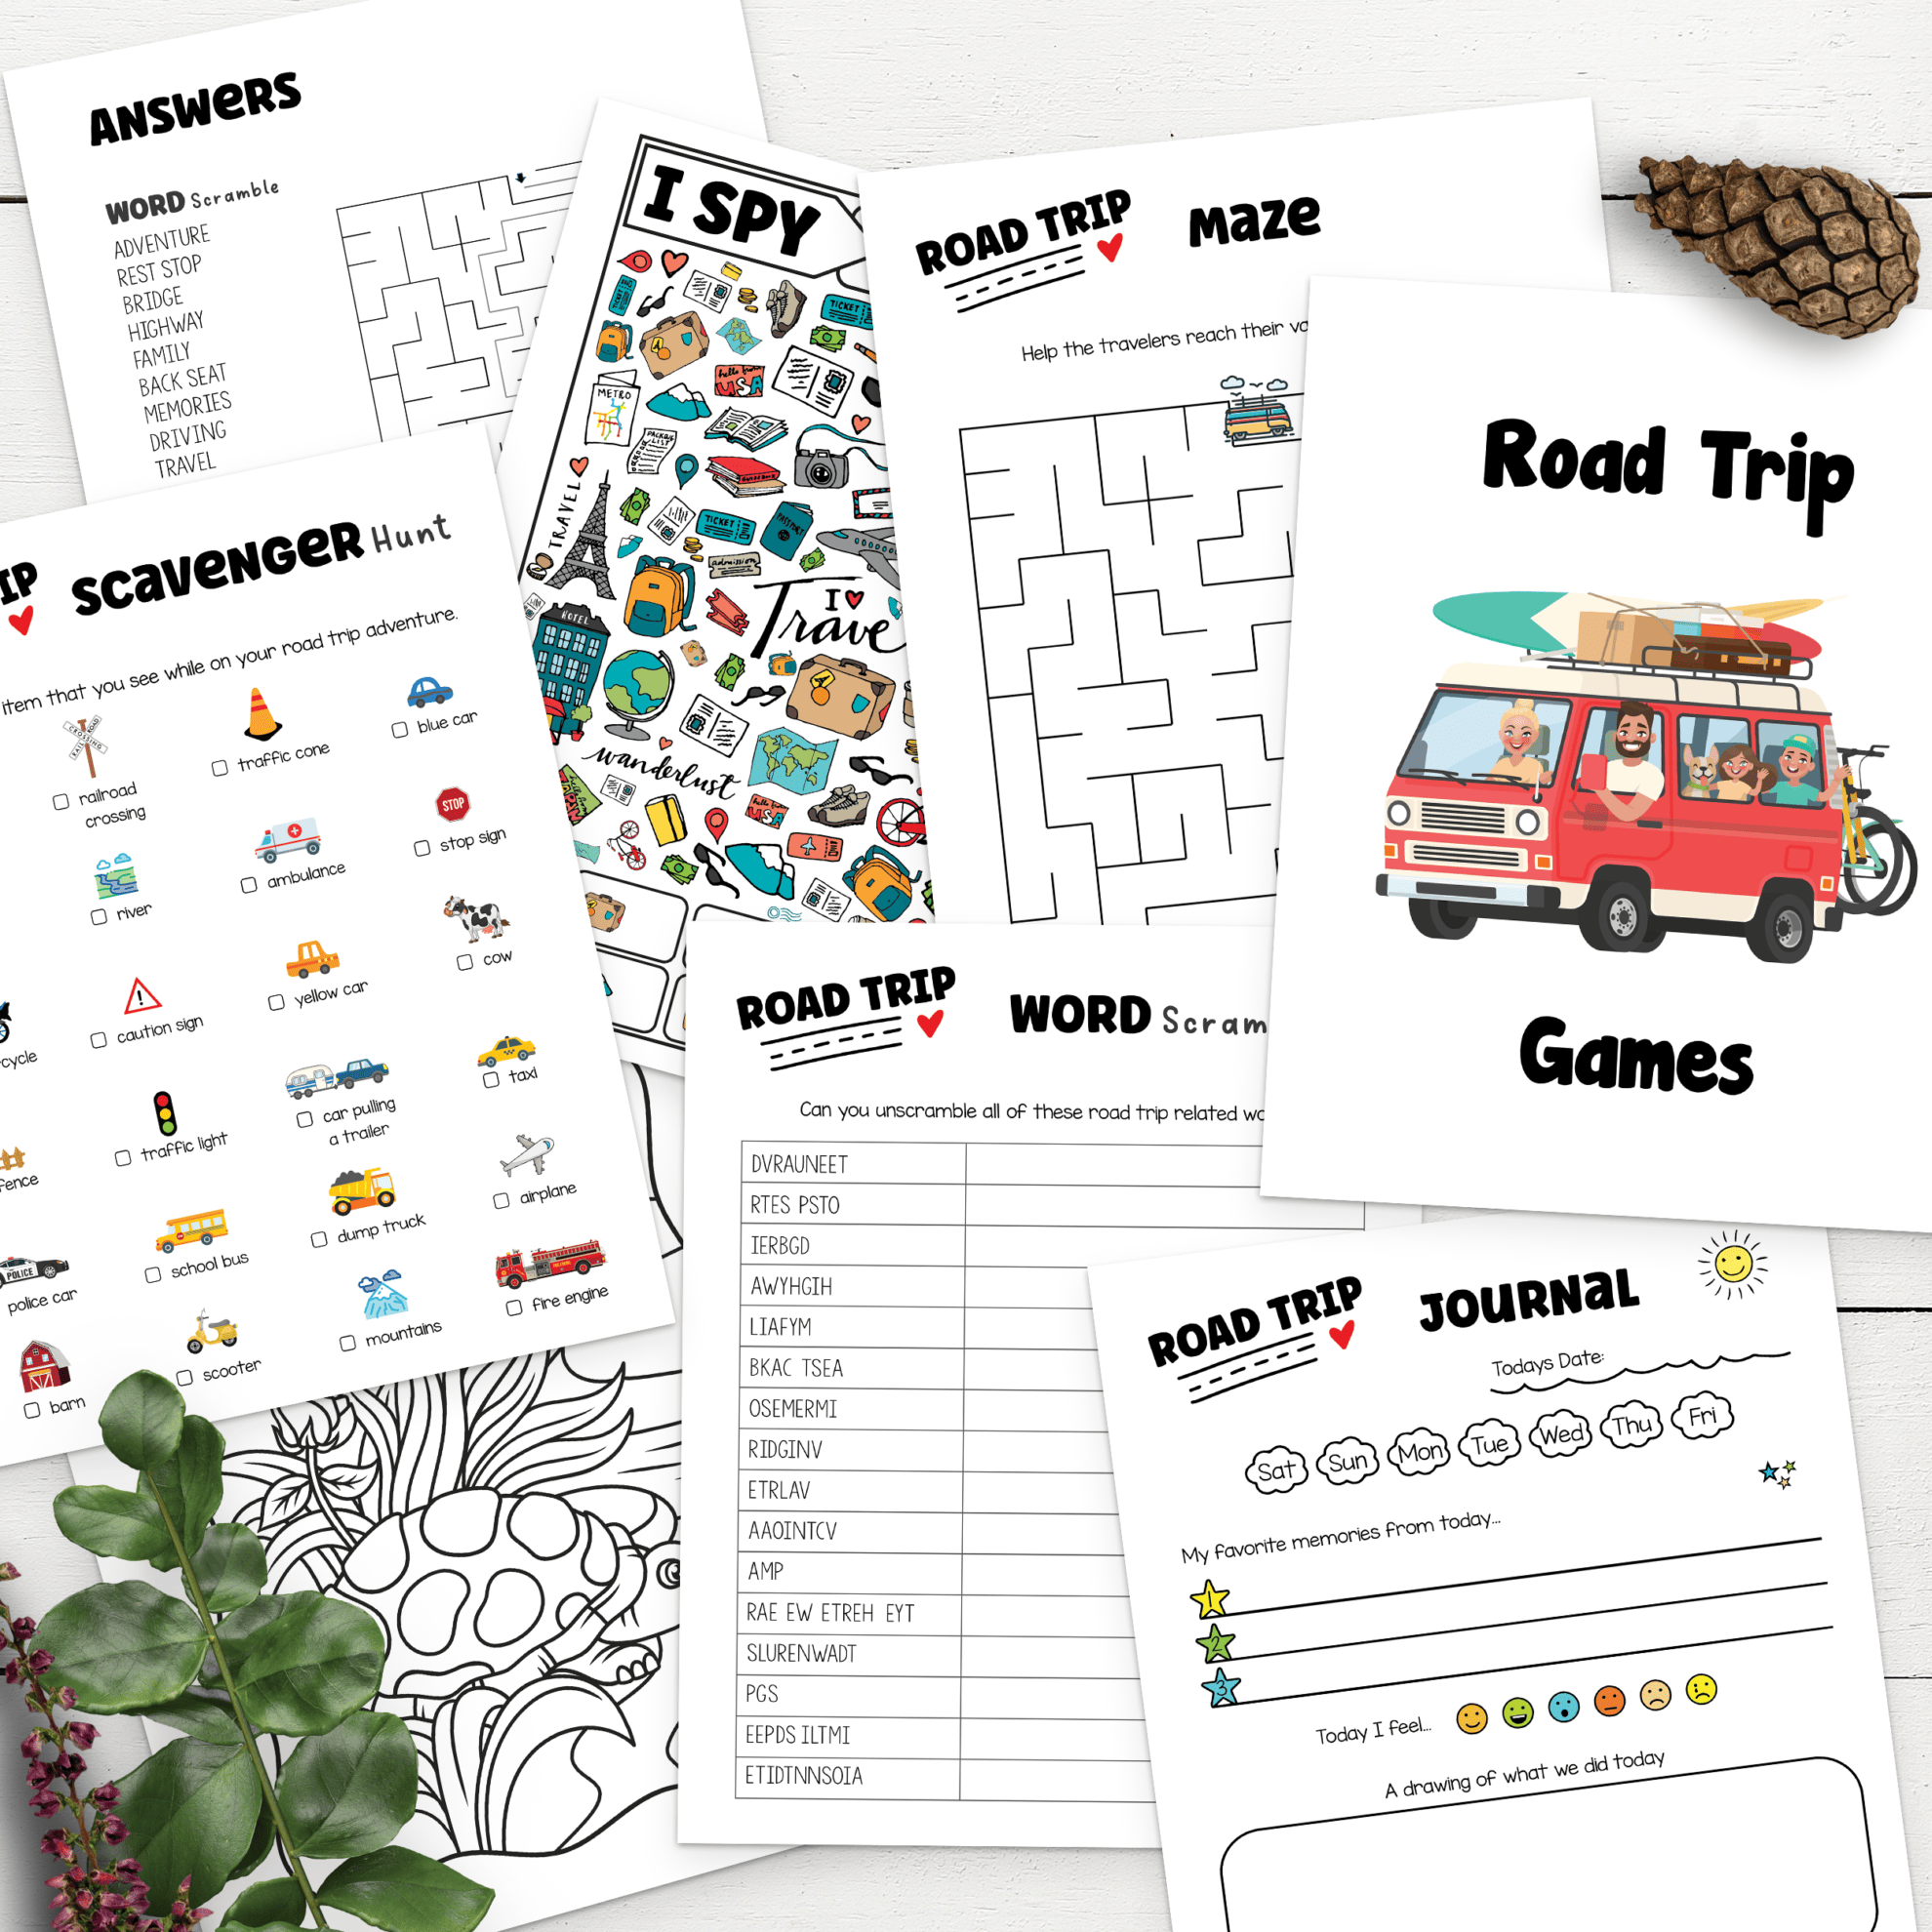 Summer road trip printables will keep kids entertained on vacation. This free summer road trip activity pack includes a word scramble, i-spy game, scavenger hunt, maze, journal sheets and more.